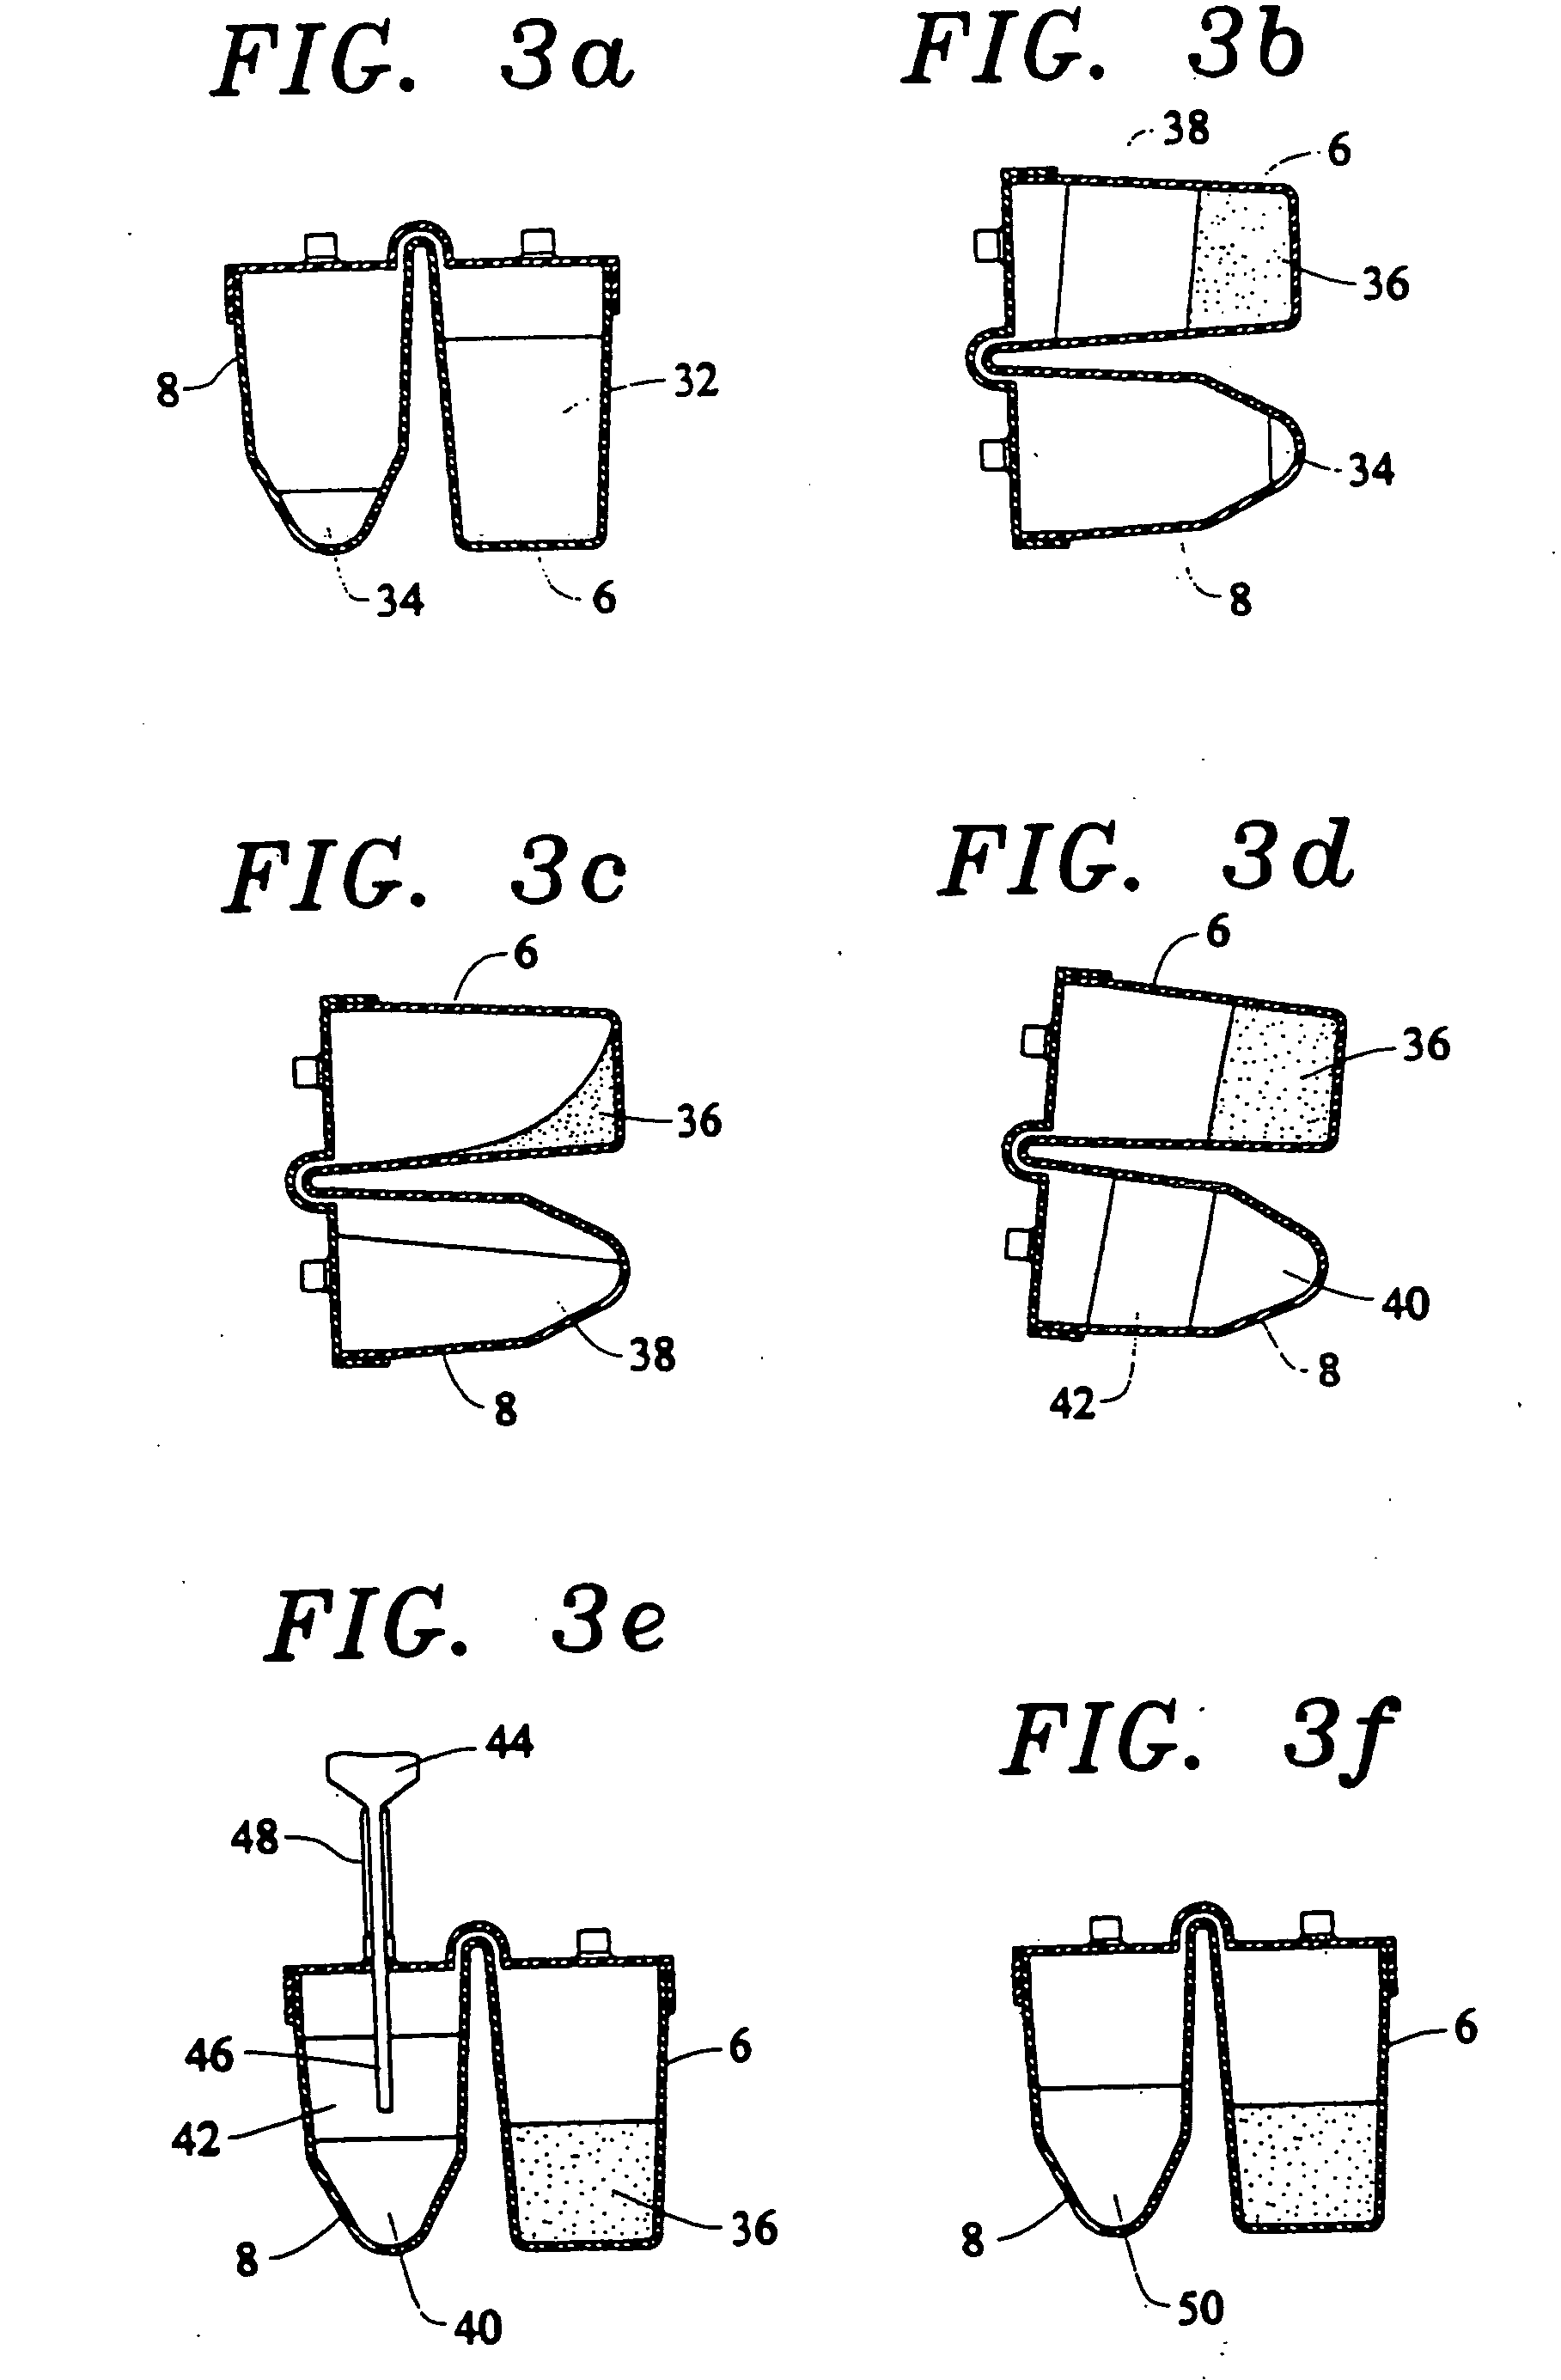 Method and apparatus for producing platelet rich plasma and/or platelet concentrate